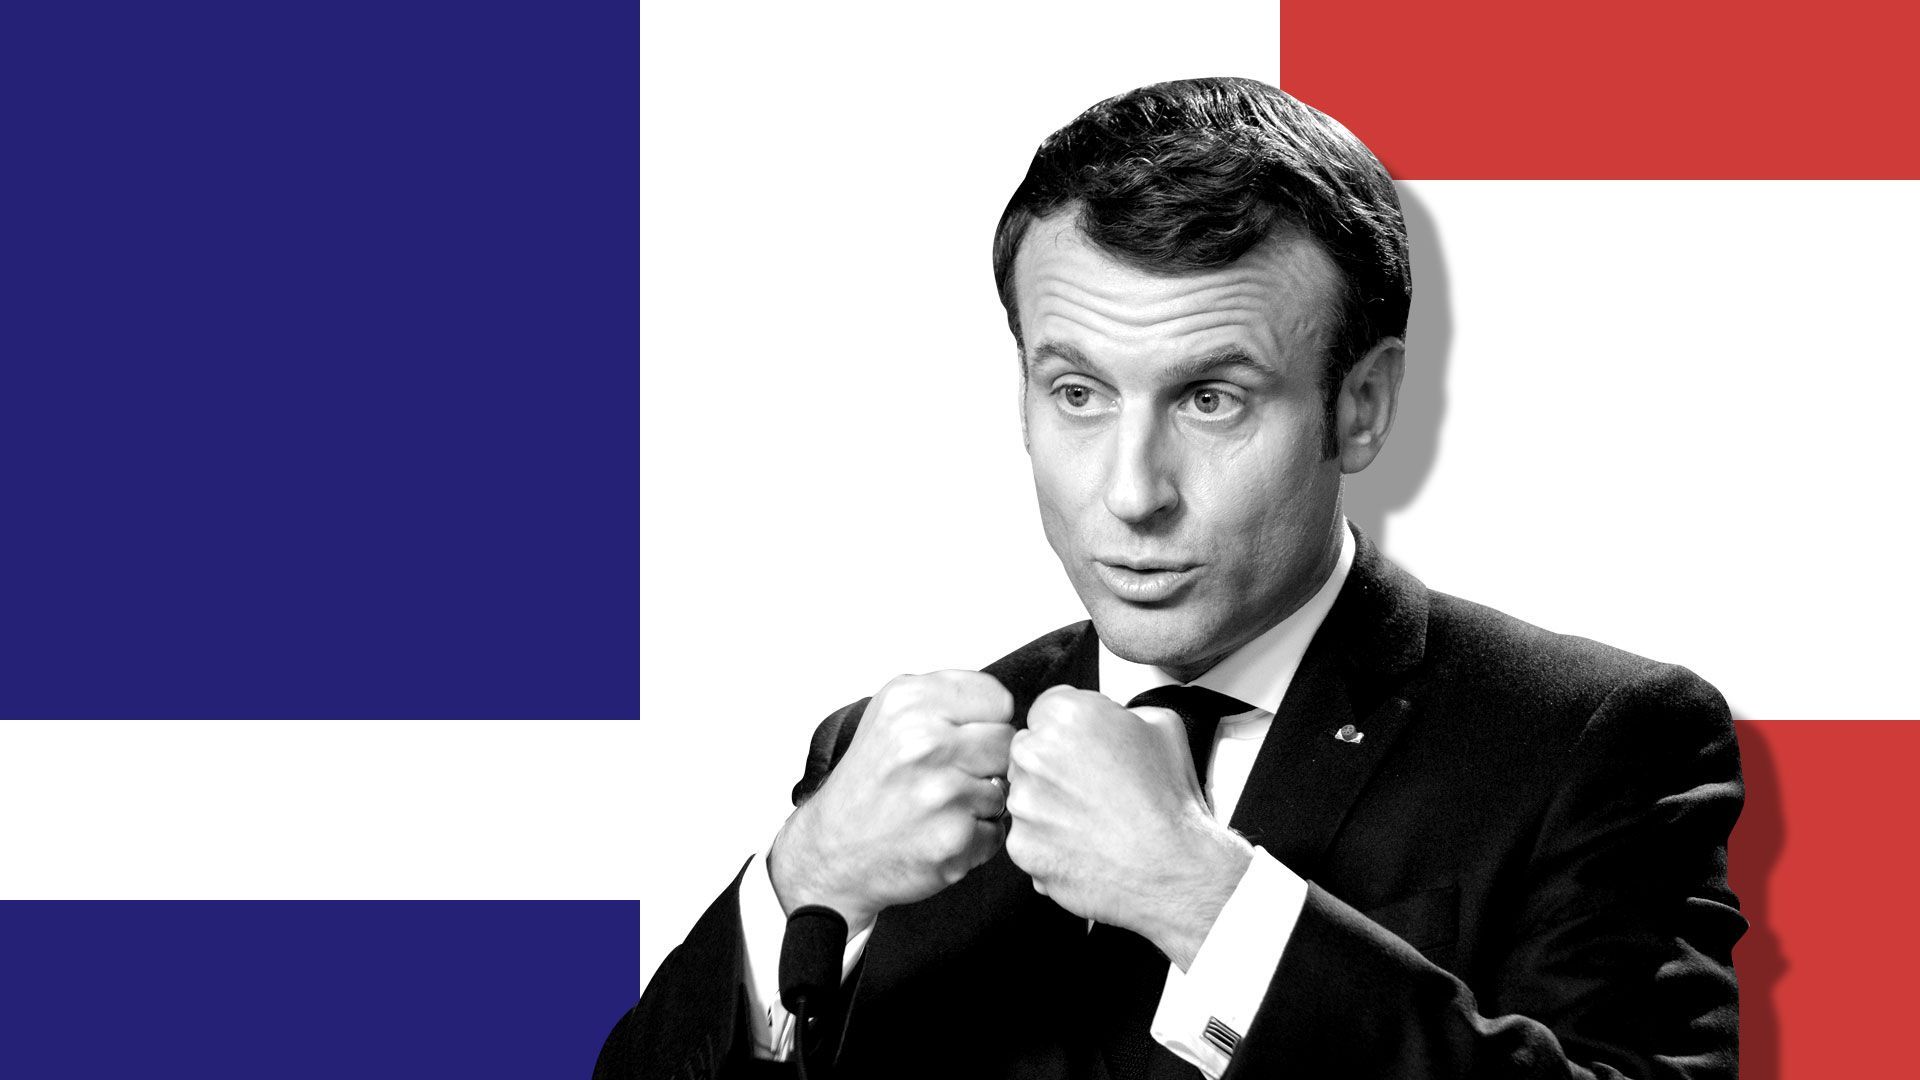 Photo illustration of Emmanuel Macron putting his fist together in front of a deconstructed French flag